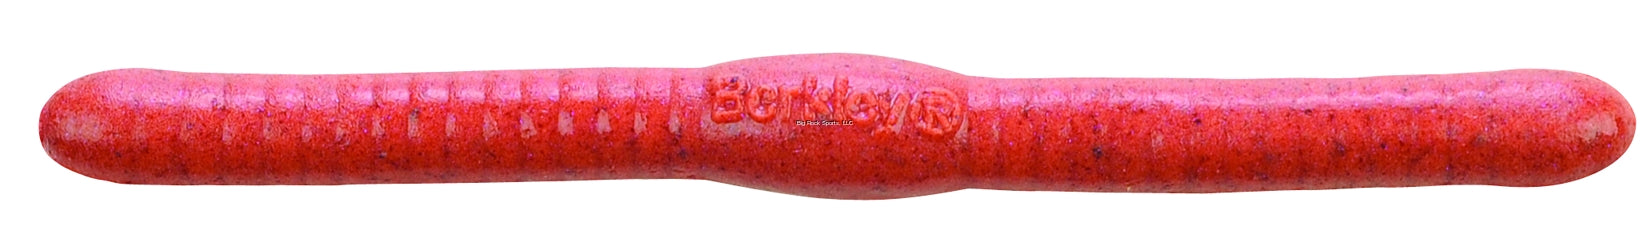 BERKLEY 2 GULP! FAT FLOATING TROUT WORMS - CHOOSE COLOR GHFFTW2